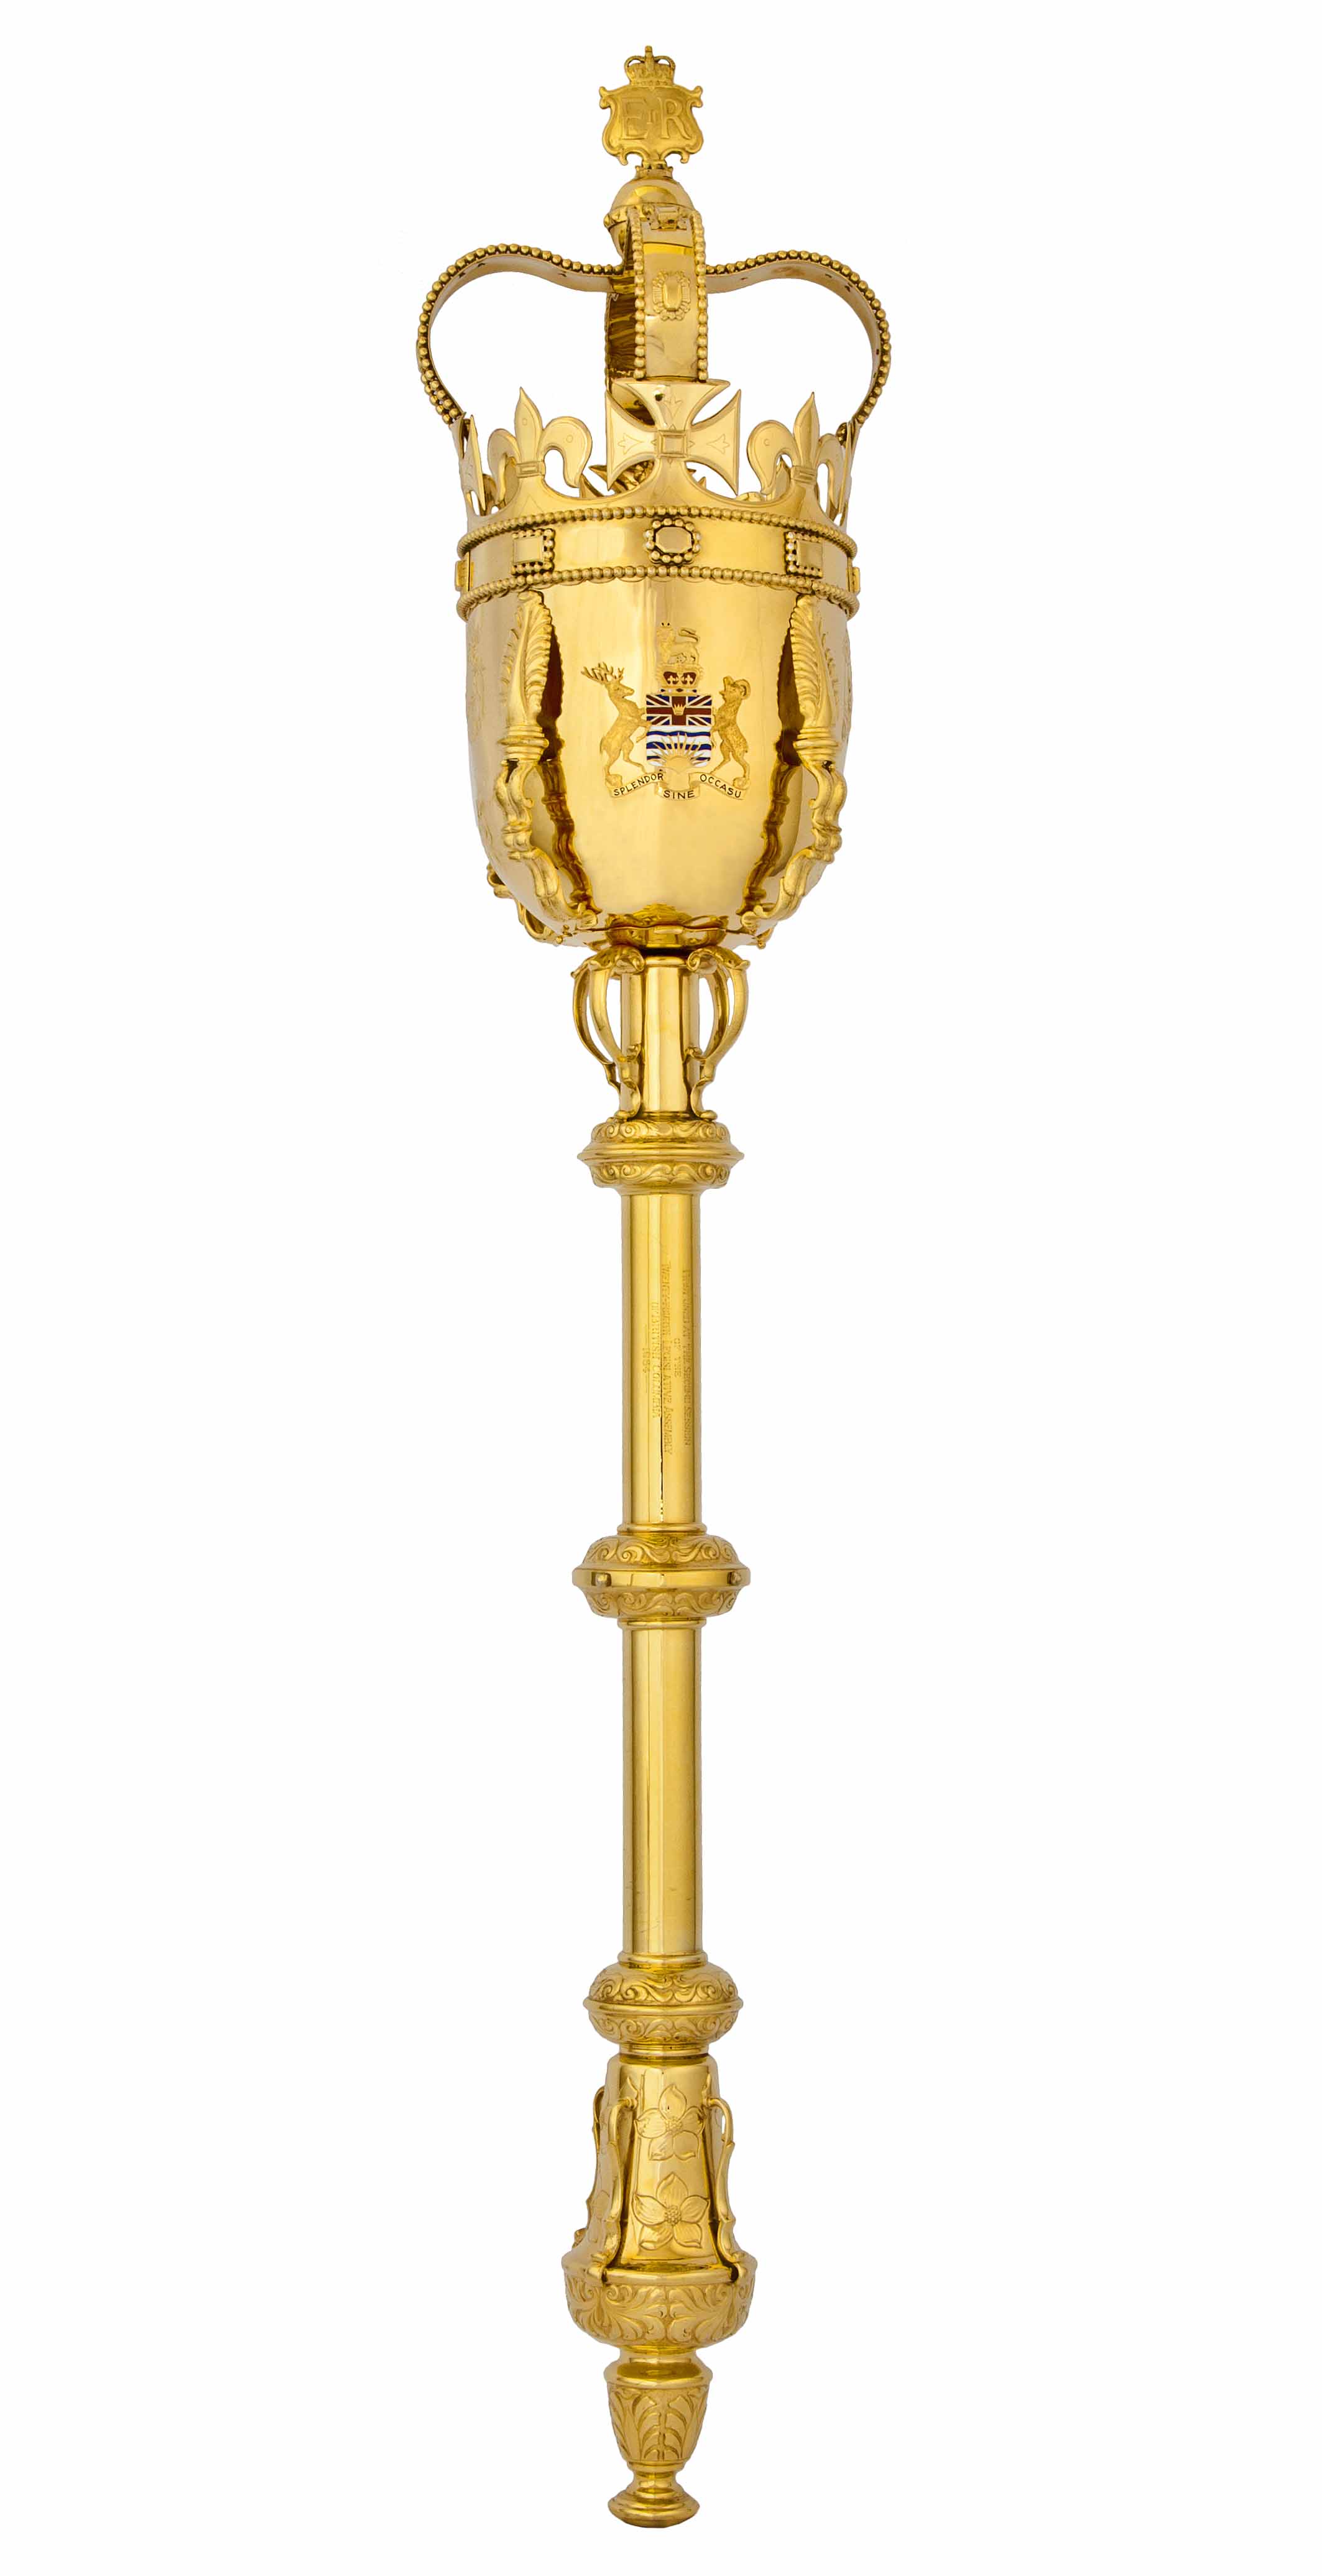 The current mace of the Legislative Assembly of British Columbia.